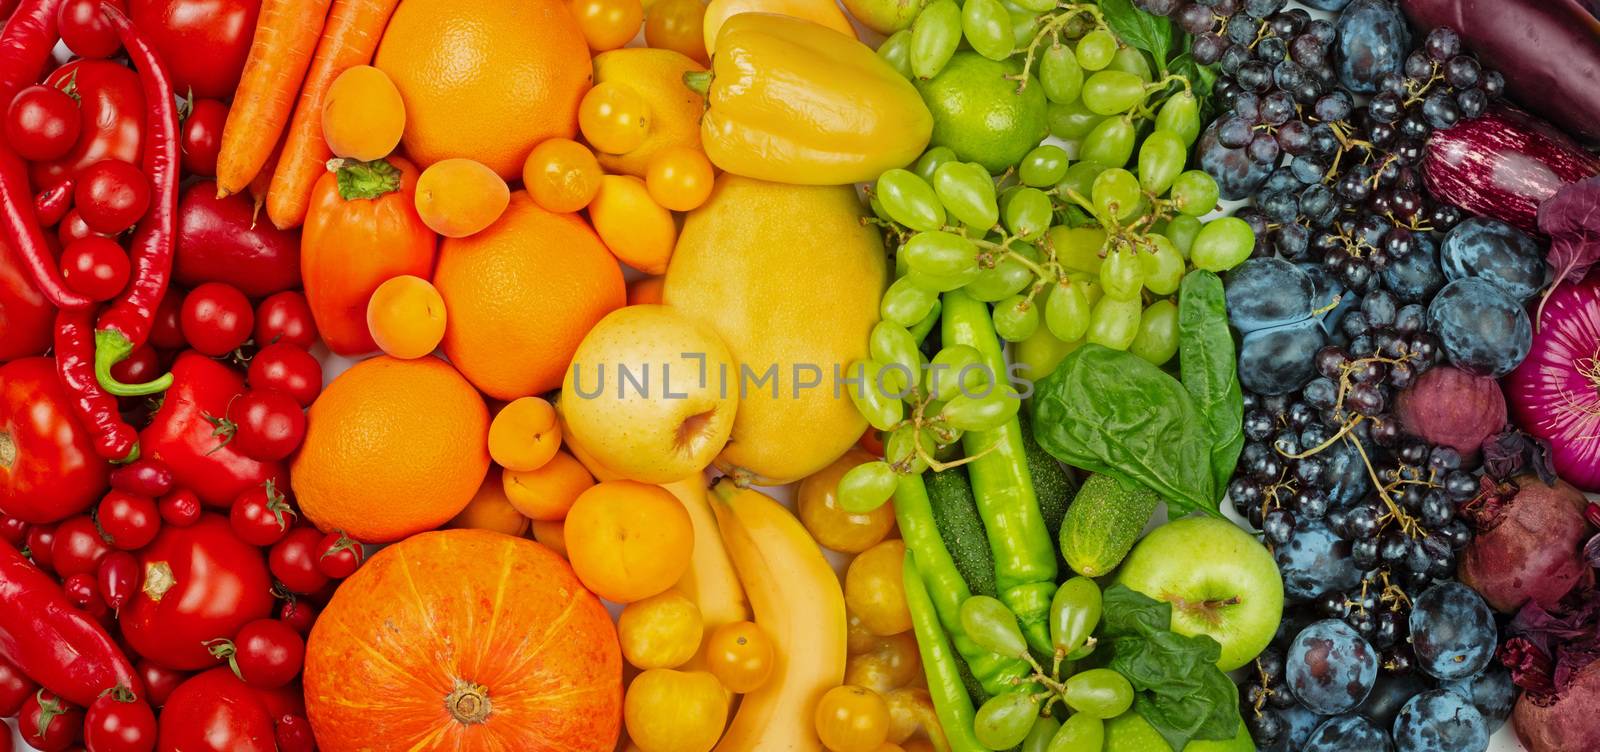 Rainbow fruit and vegetable background by destillat